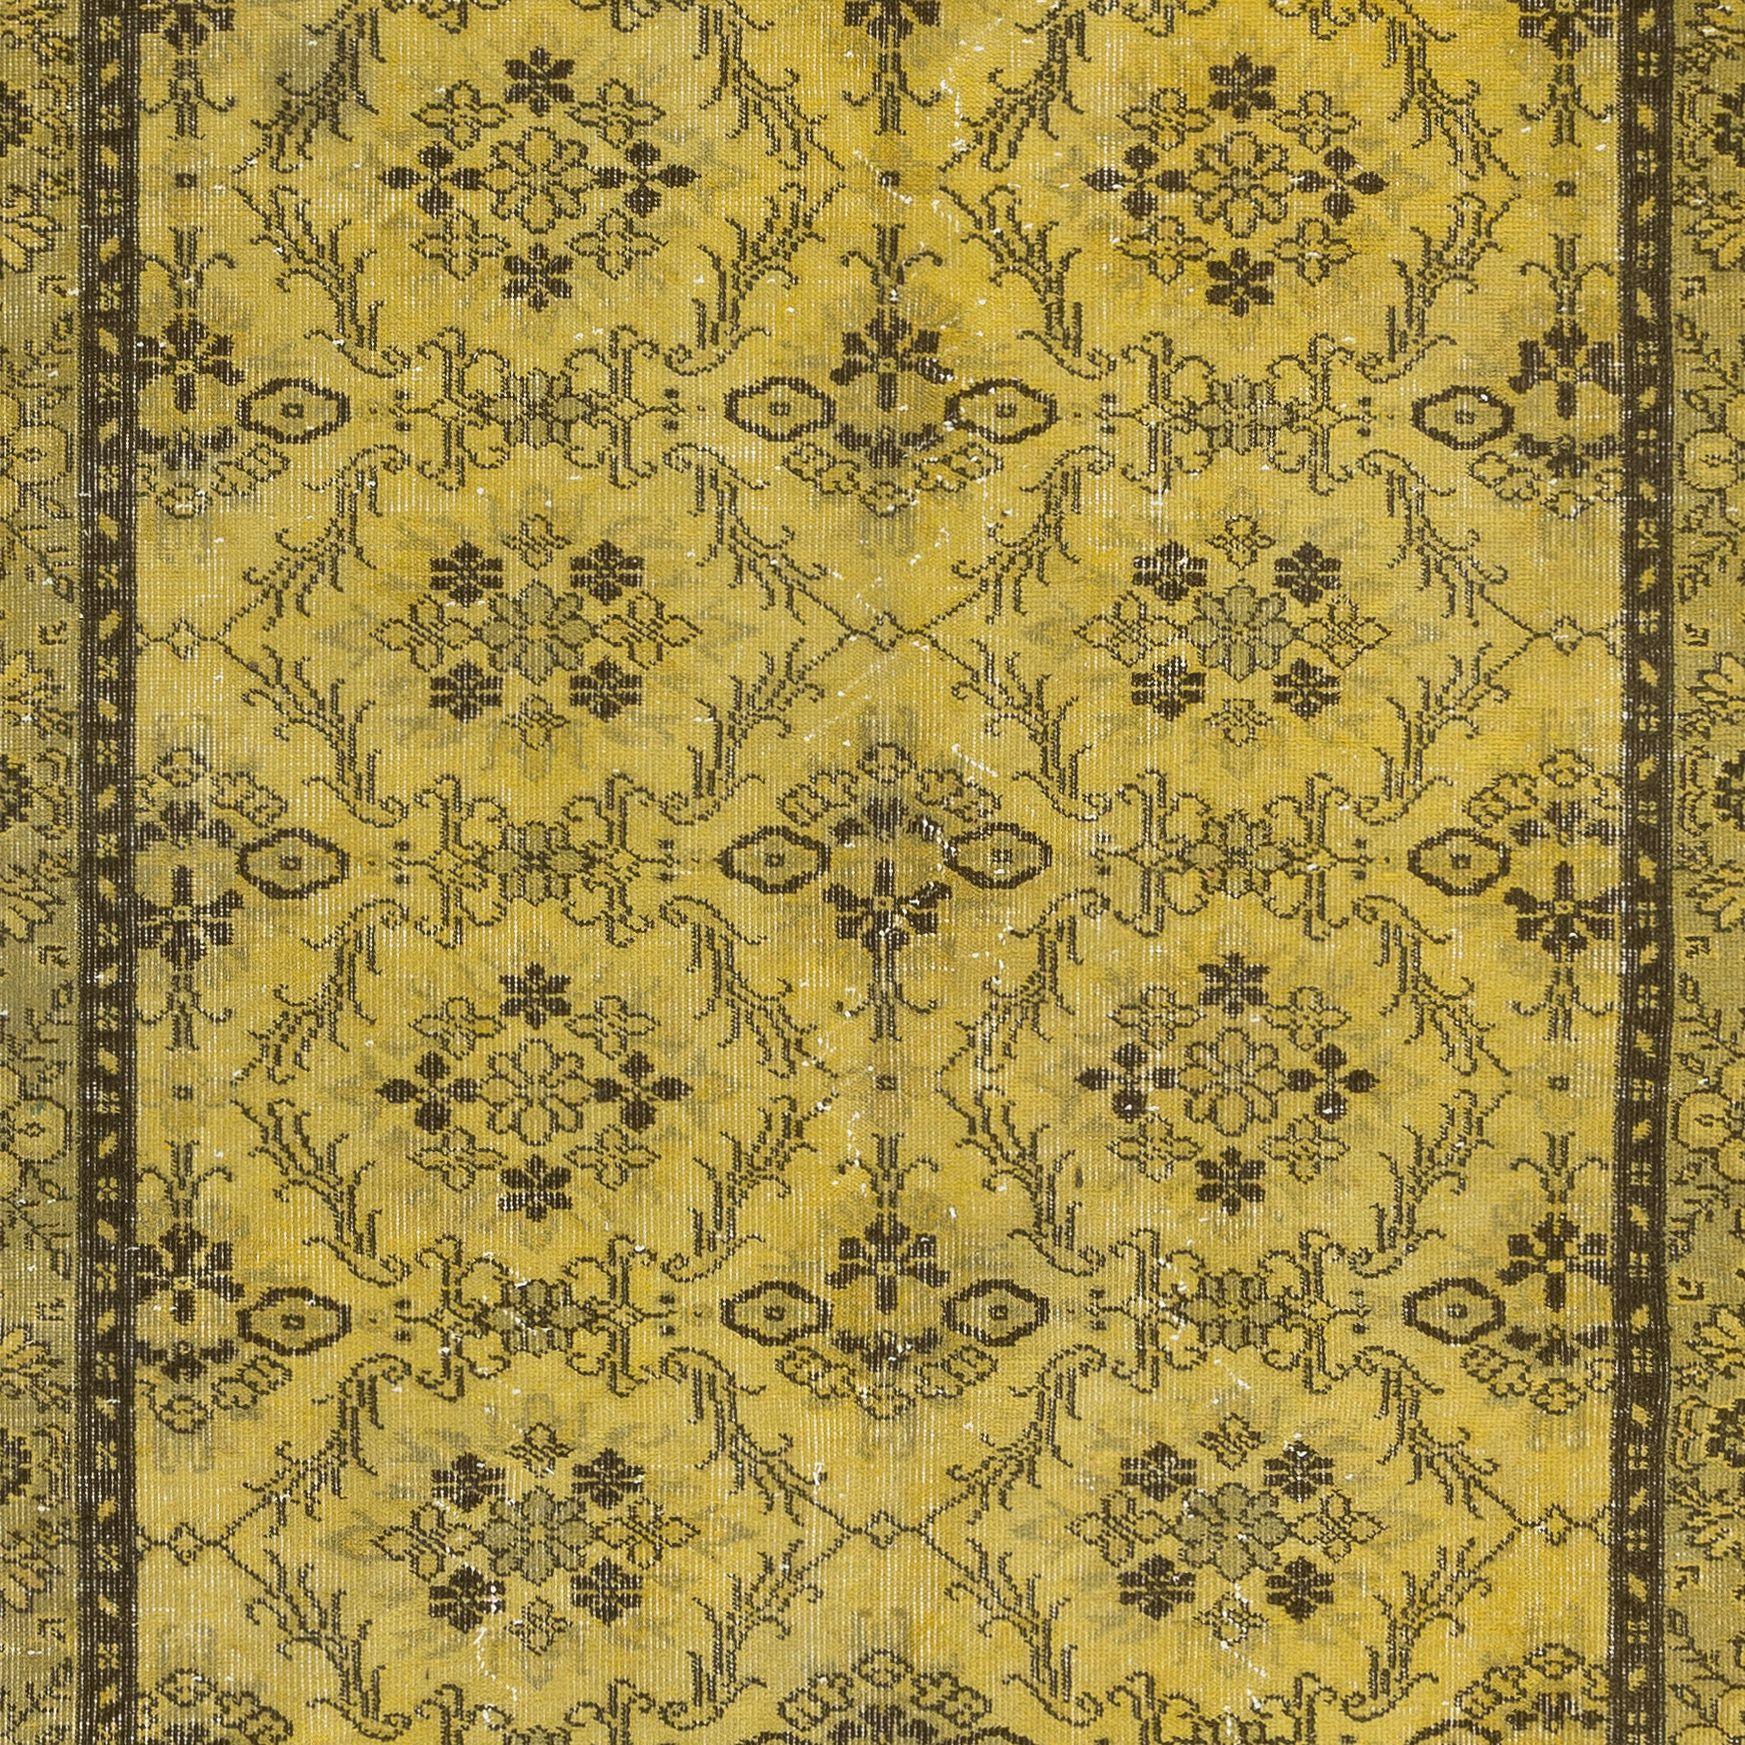 Hand-Knotted 5.4x9 Ft Yellow Turkish Area Rug, Floral Handmade Carpet, Modern Floor Covering For Sale